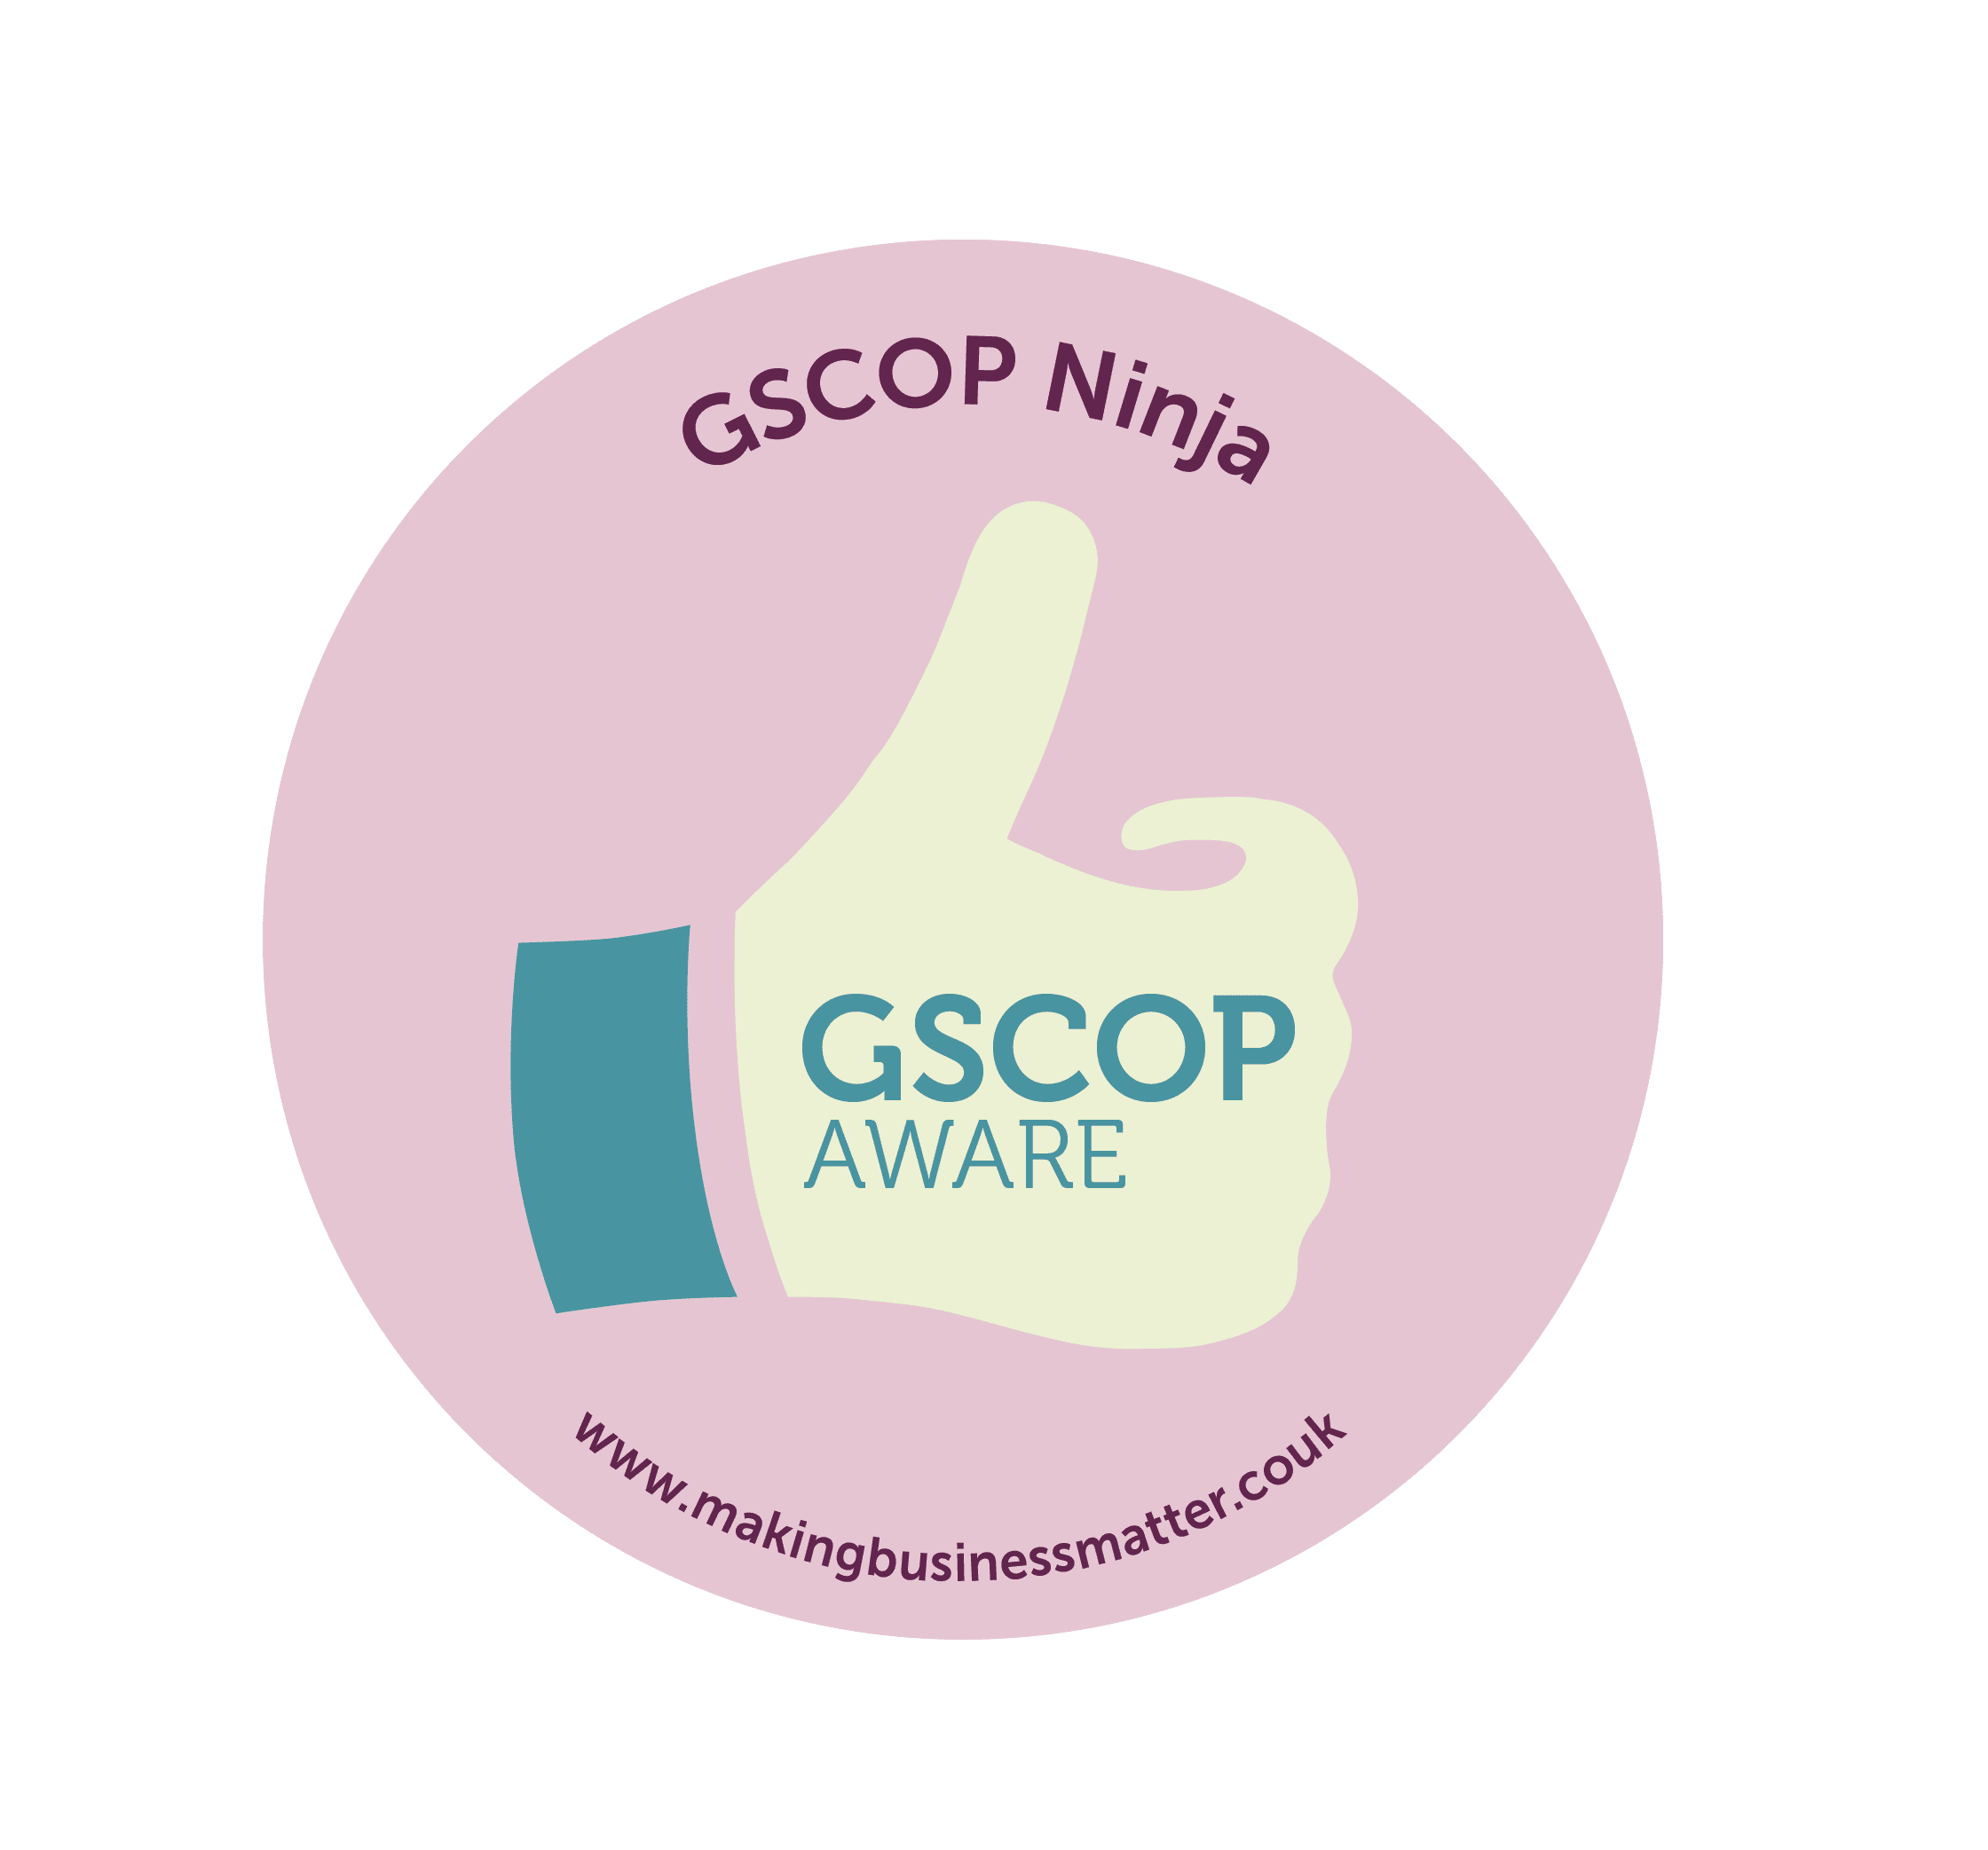 Circle showing GSCOP Ninja words and a thumbs up showing GSCOP AWARE